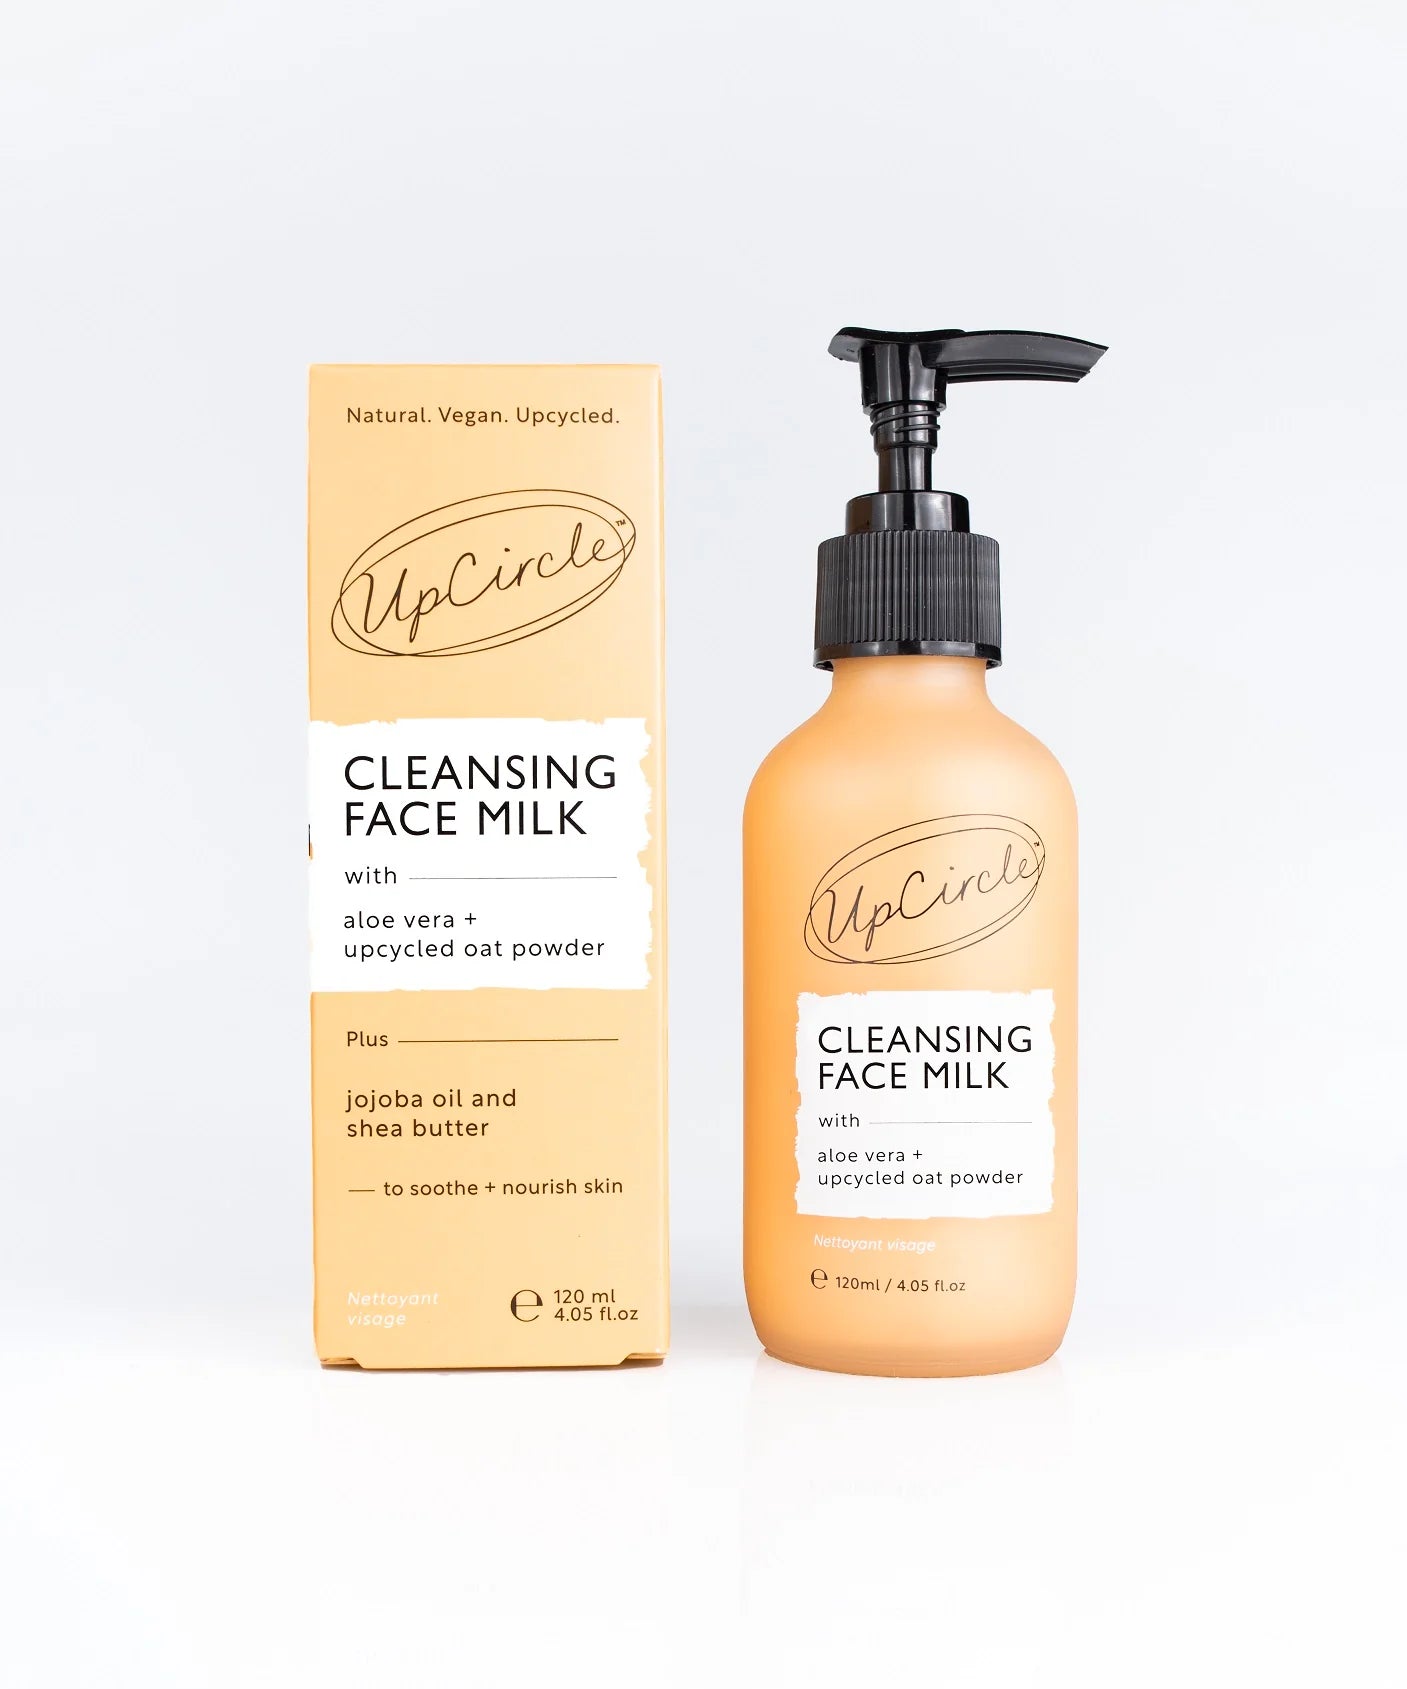 Upcircle Cleansing Face Milk with oat powder + aloe vera 120ml